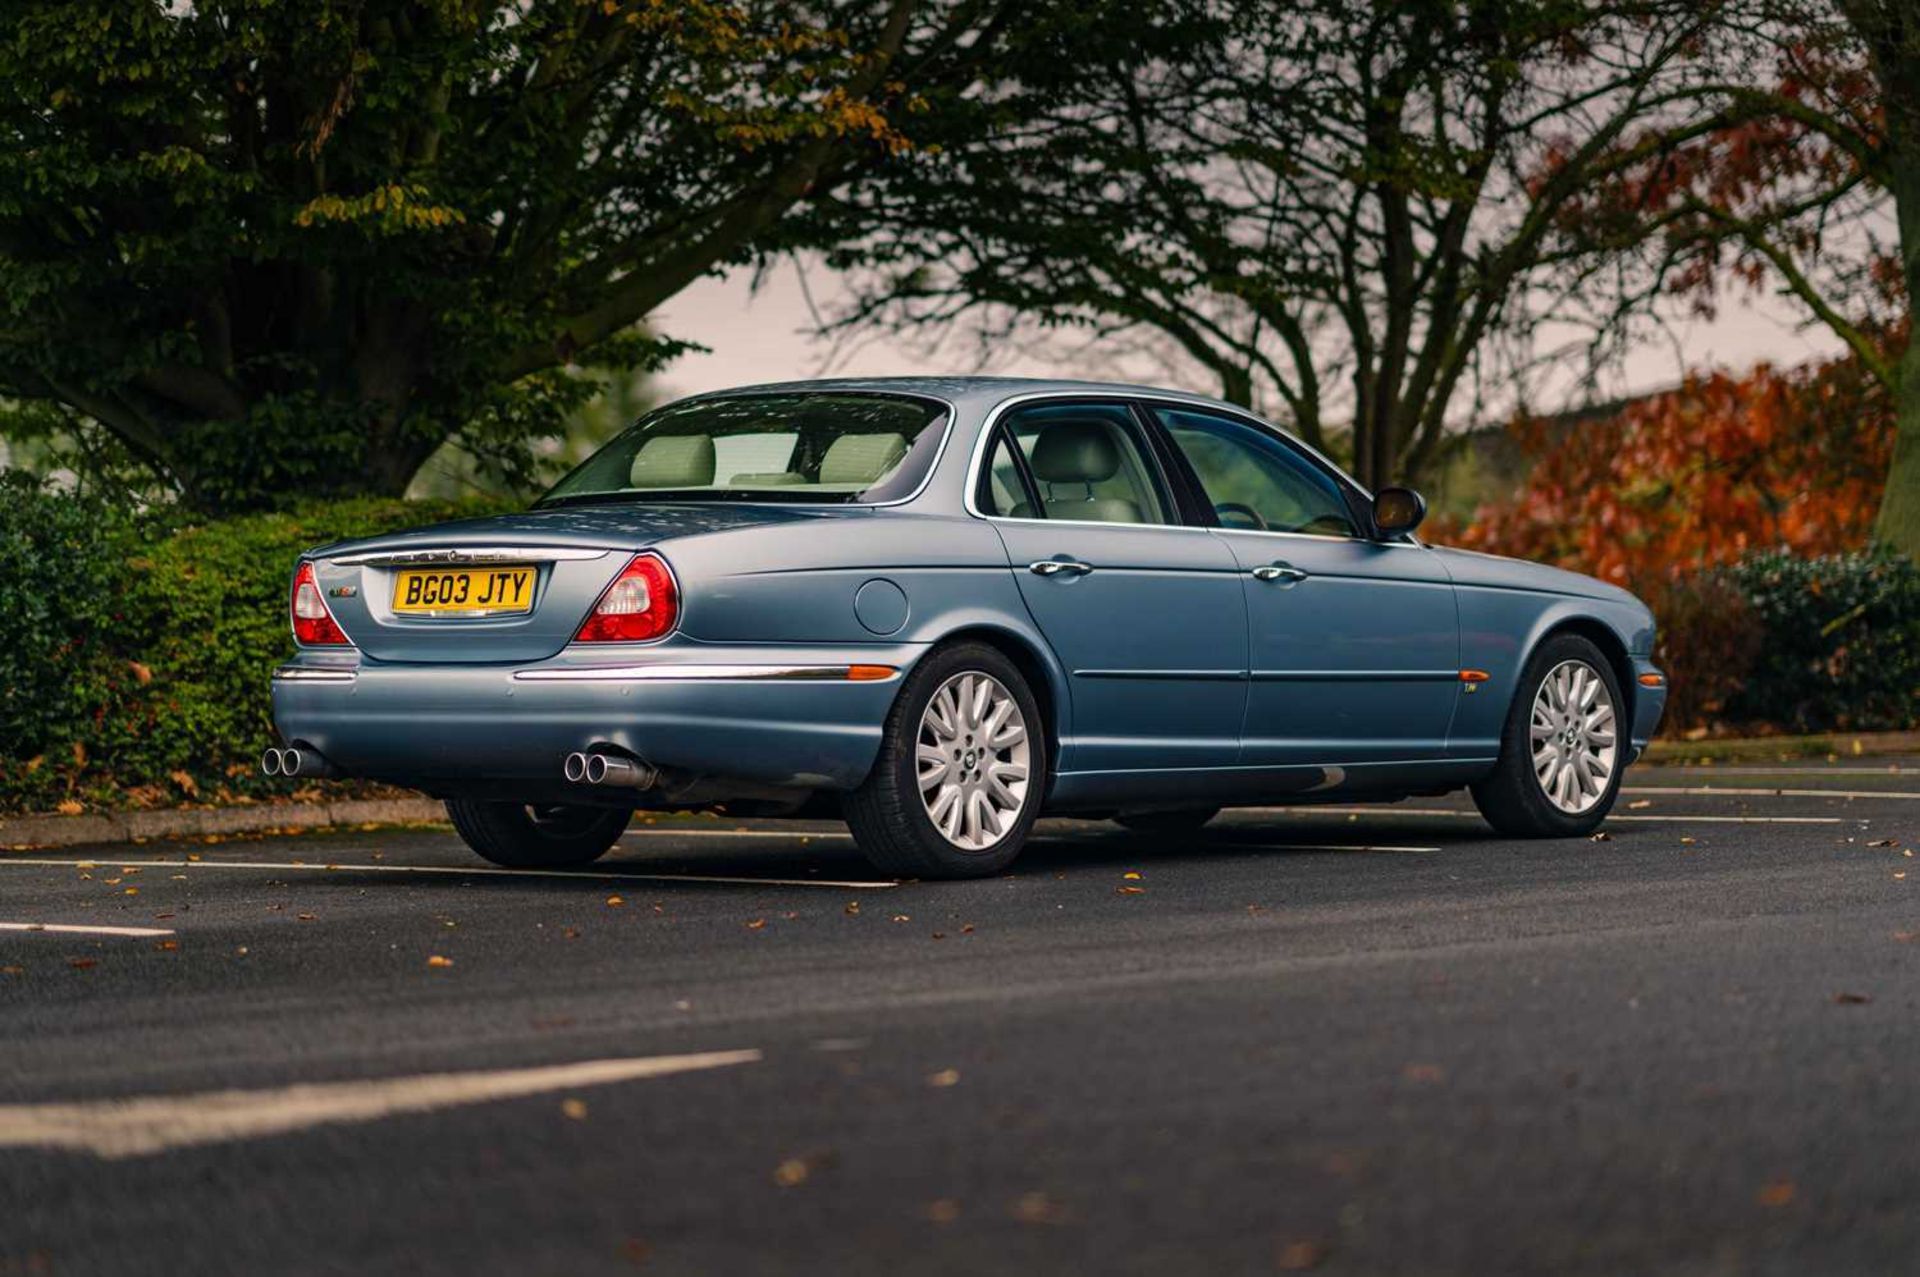 2003 Jaguar XJ8 4.2 V8 SE Range-topping 'Special Equipment' model, with a current MOT and warranted  - Image 11 of 63